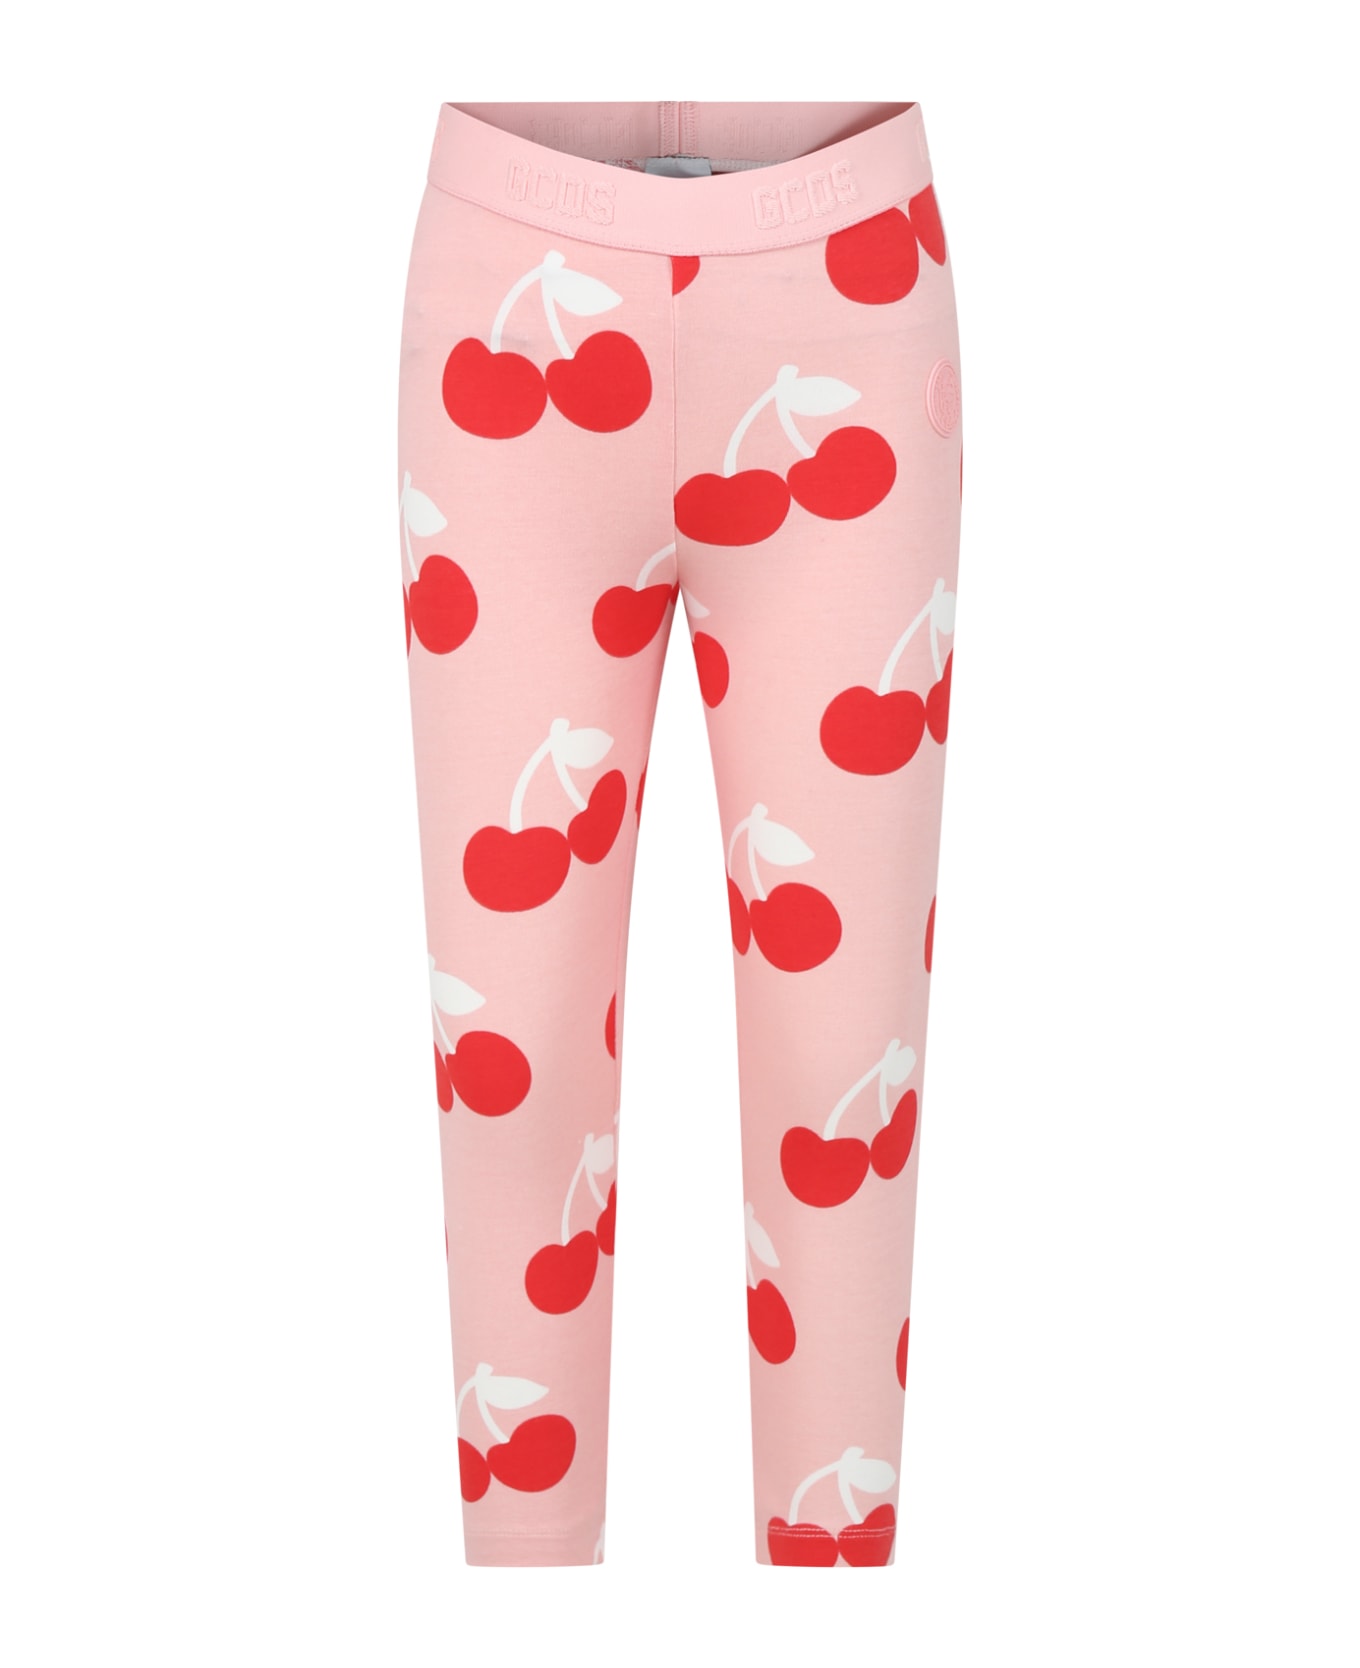 GCDS Mini Pink Leggings For Girl With Cherries - Pink ボトムス